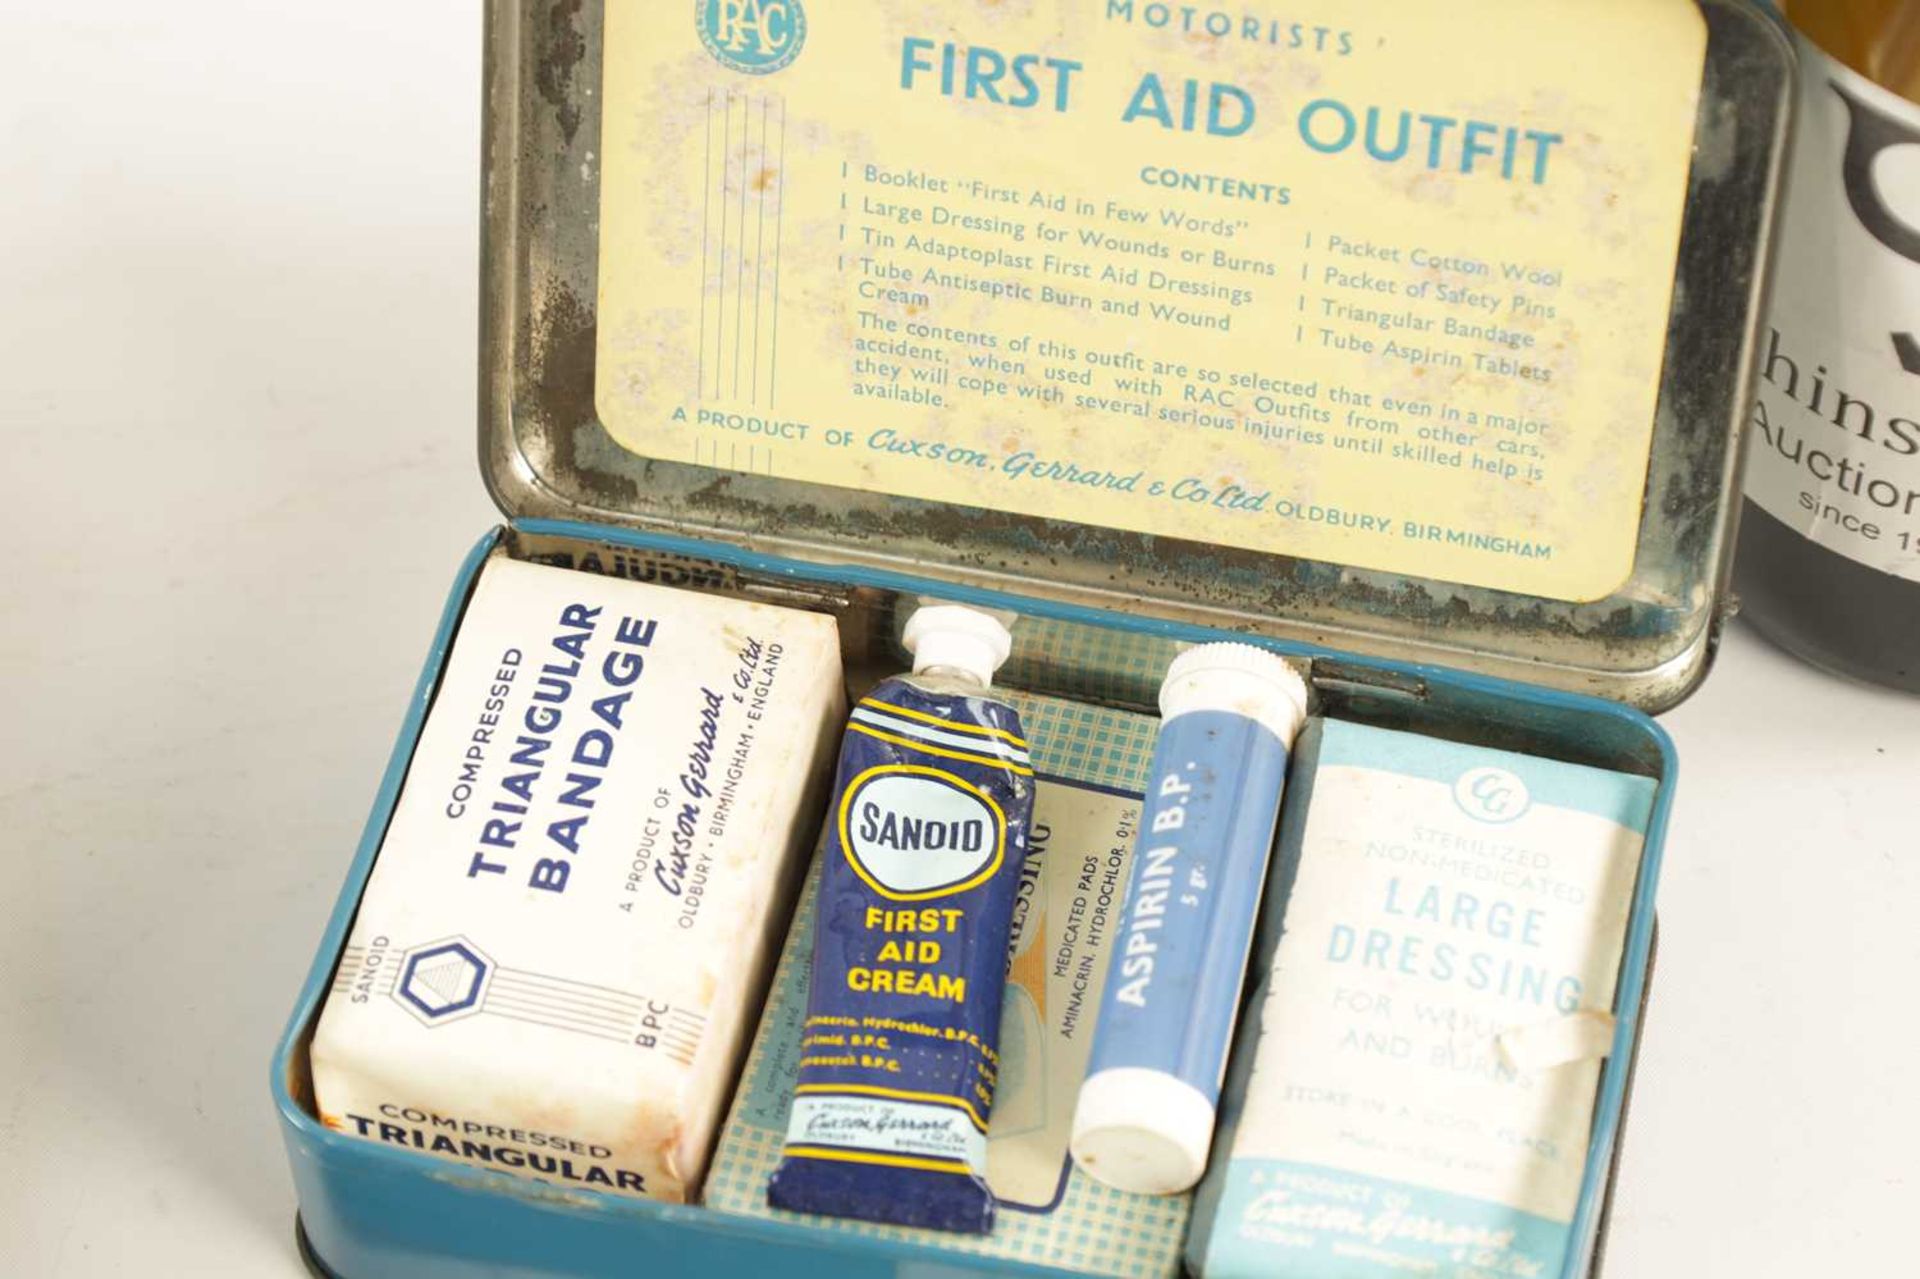 TWO VINTAGE MOTORIST FIRST AID KITS - Image 3 of 6